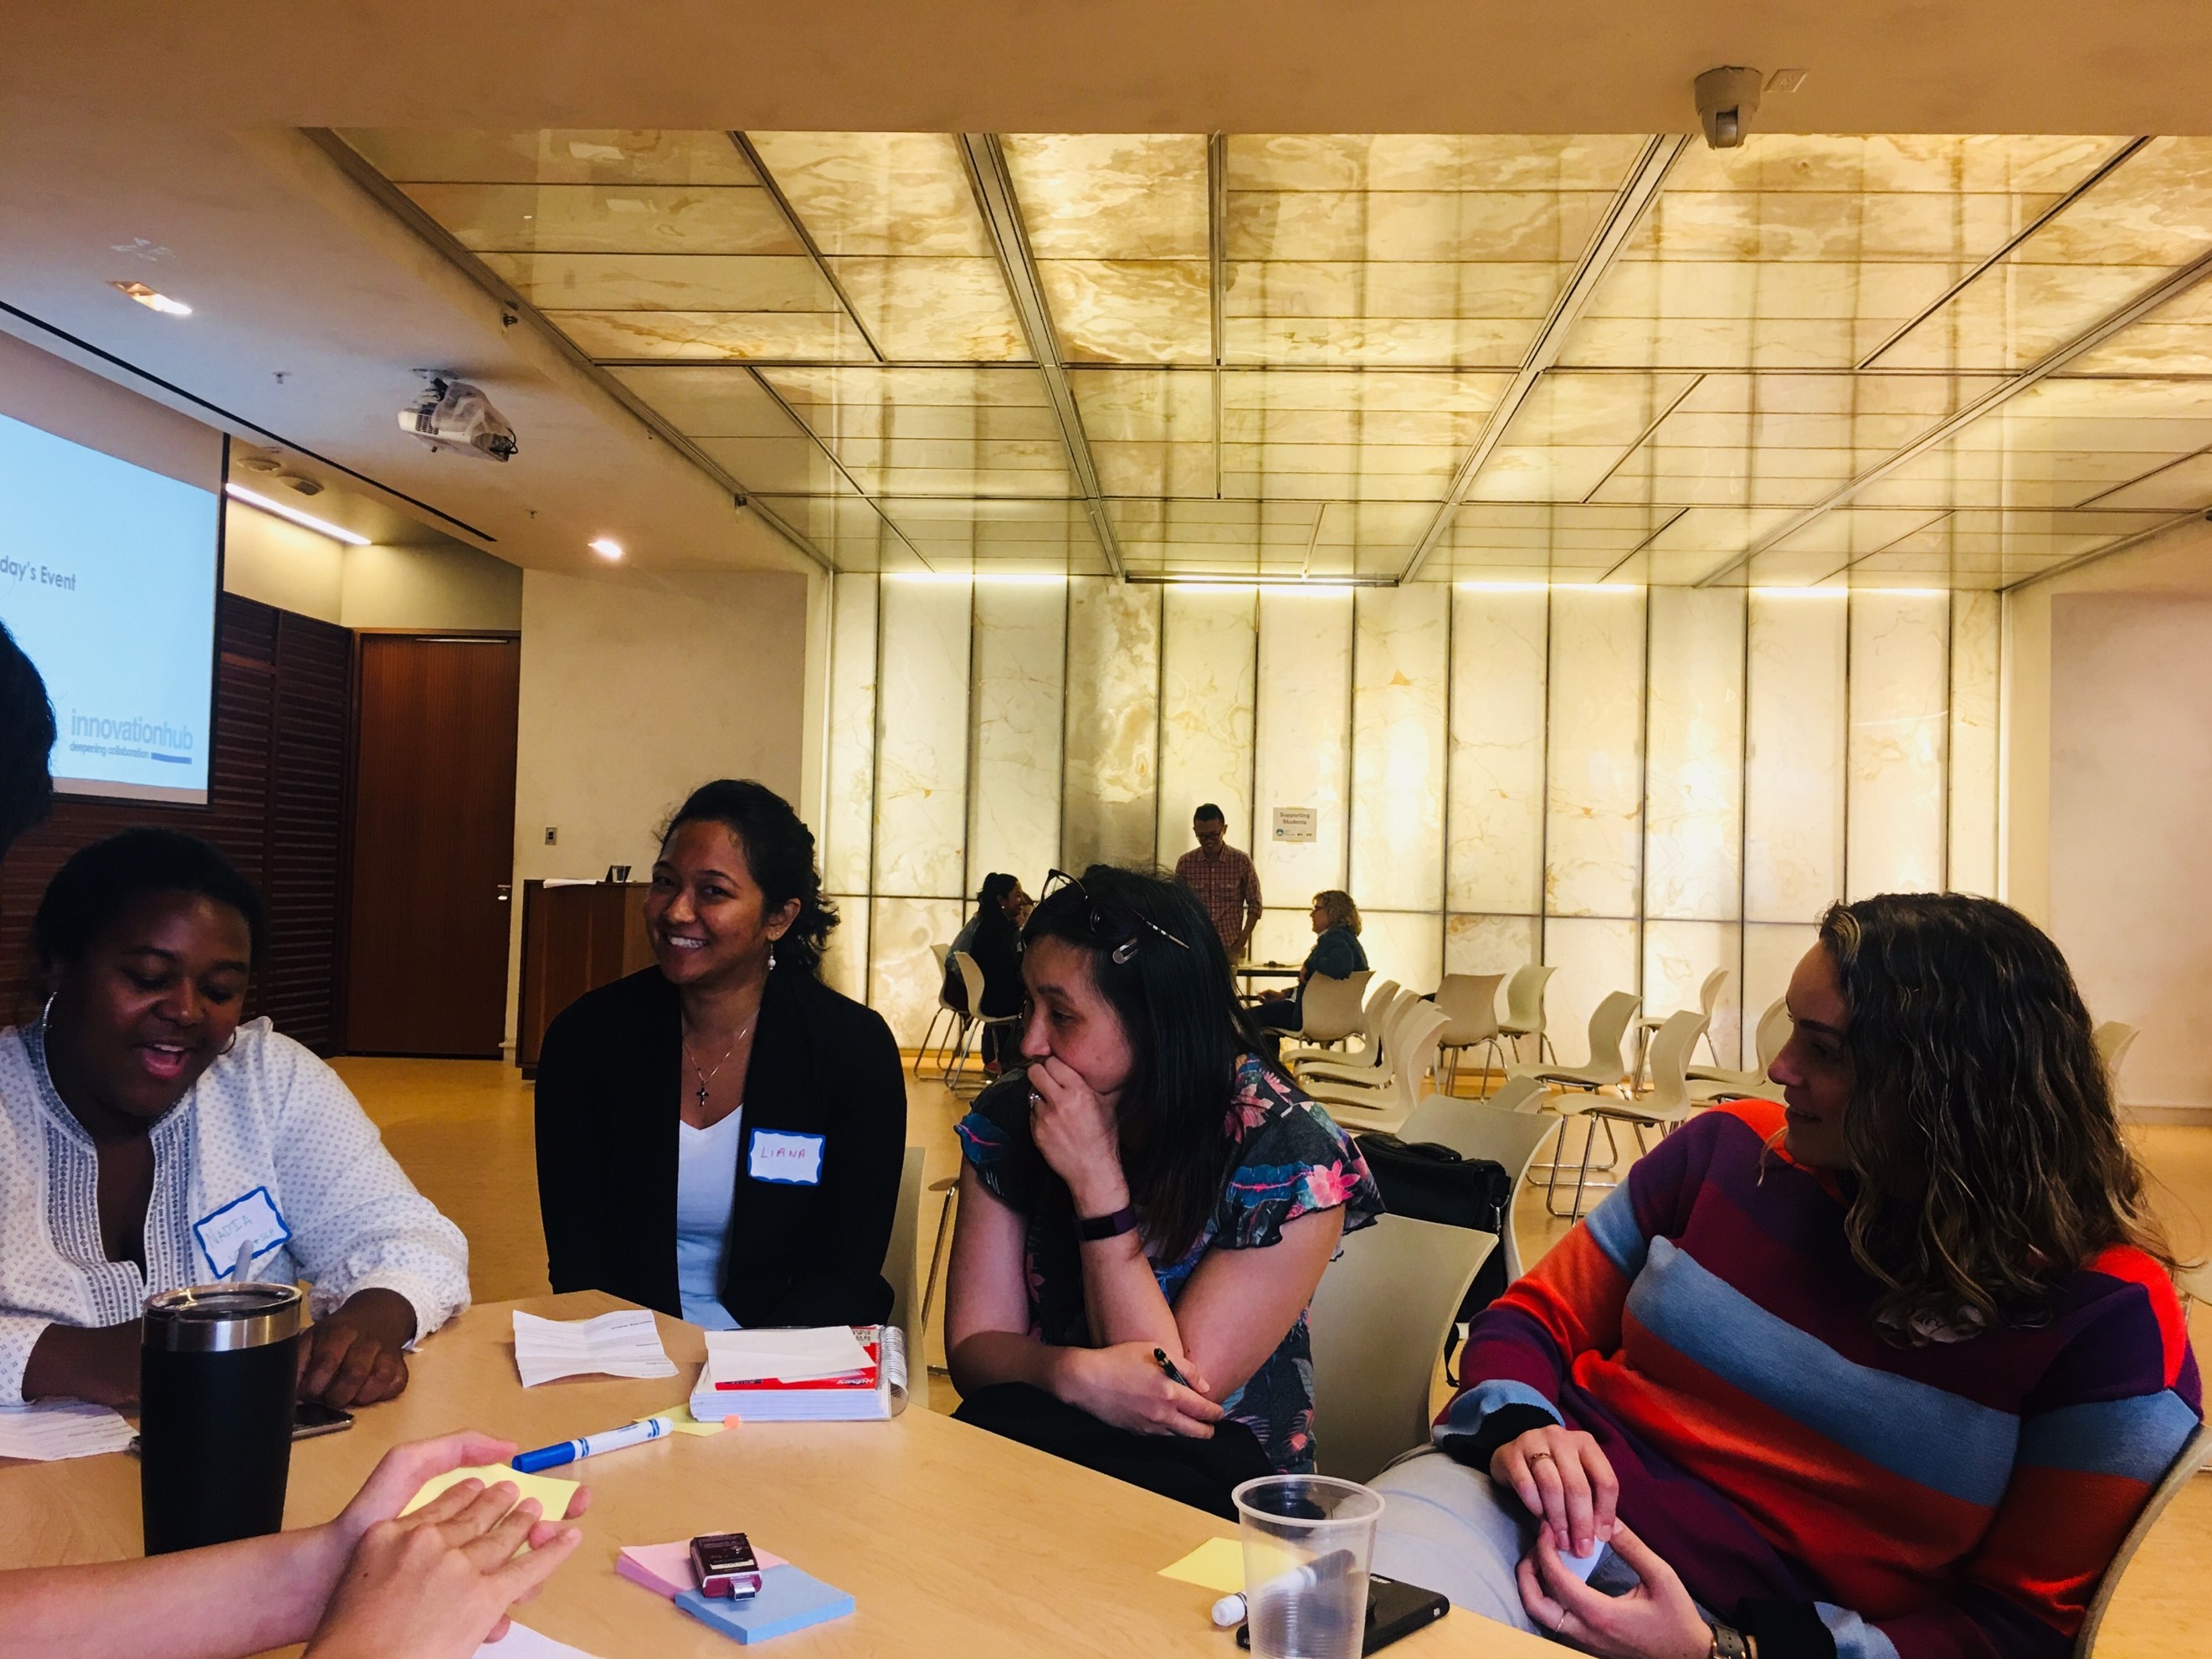 Image from the SLP event, where individuals are sitting at the table chatting and connecting